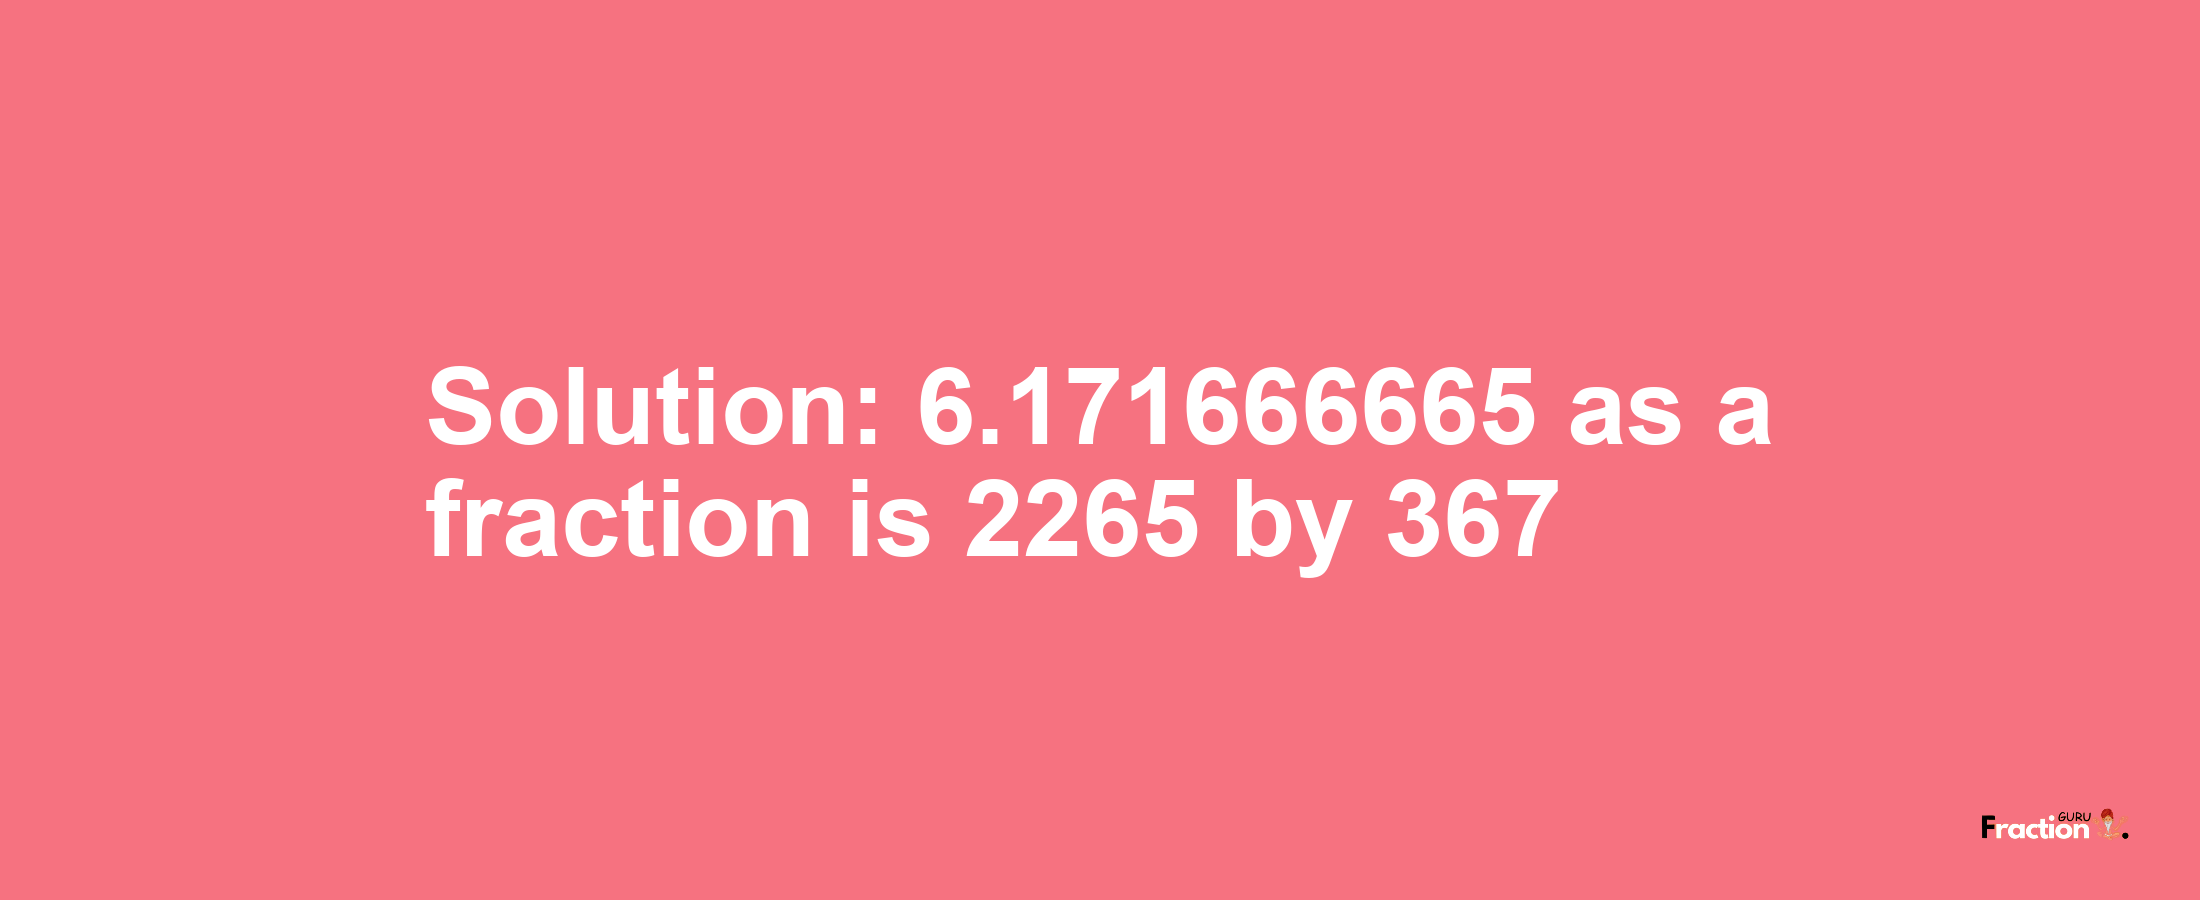 Solution:6.171666665 as a fraction is 2265/367